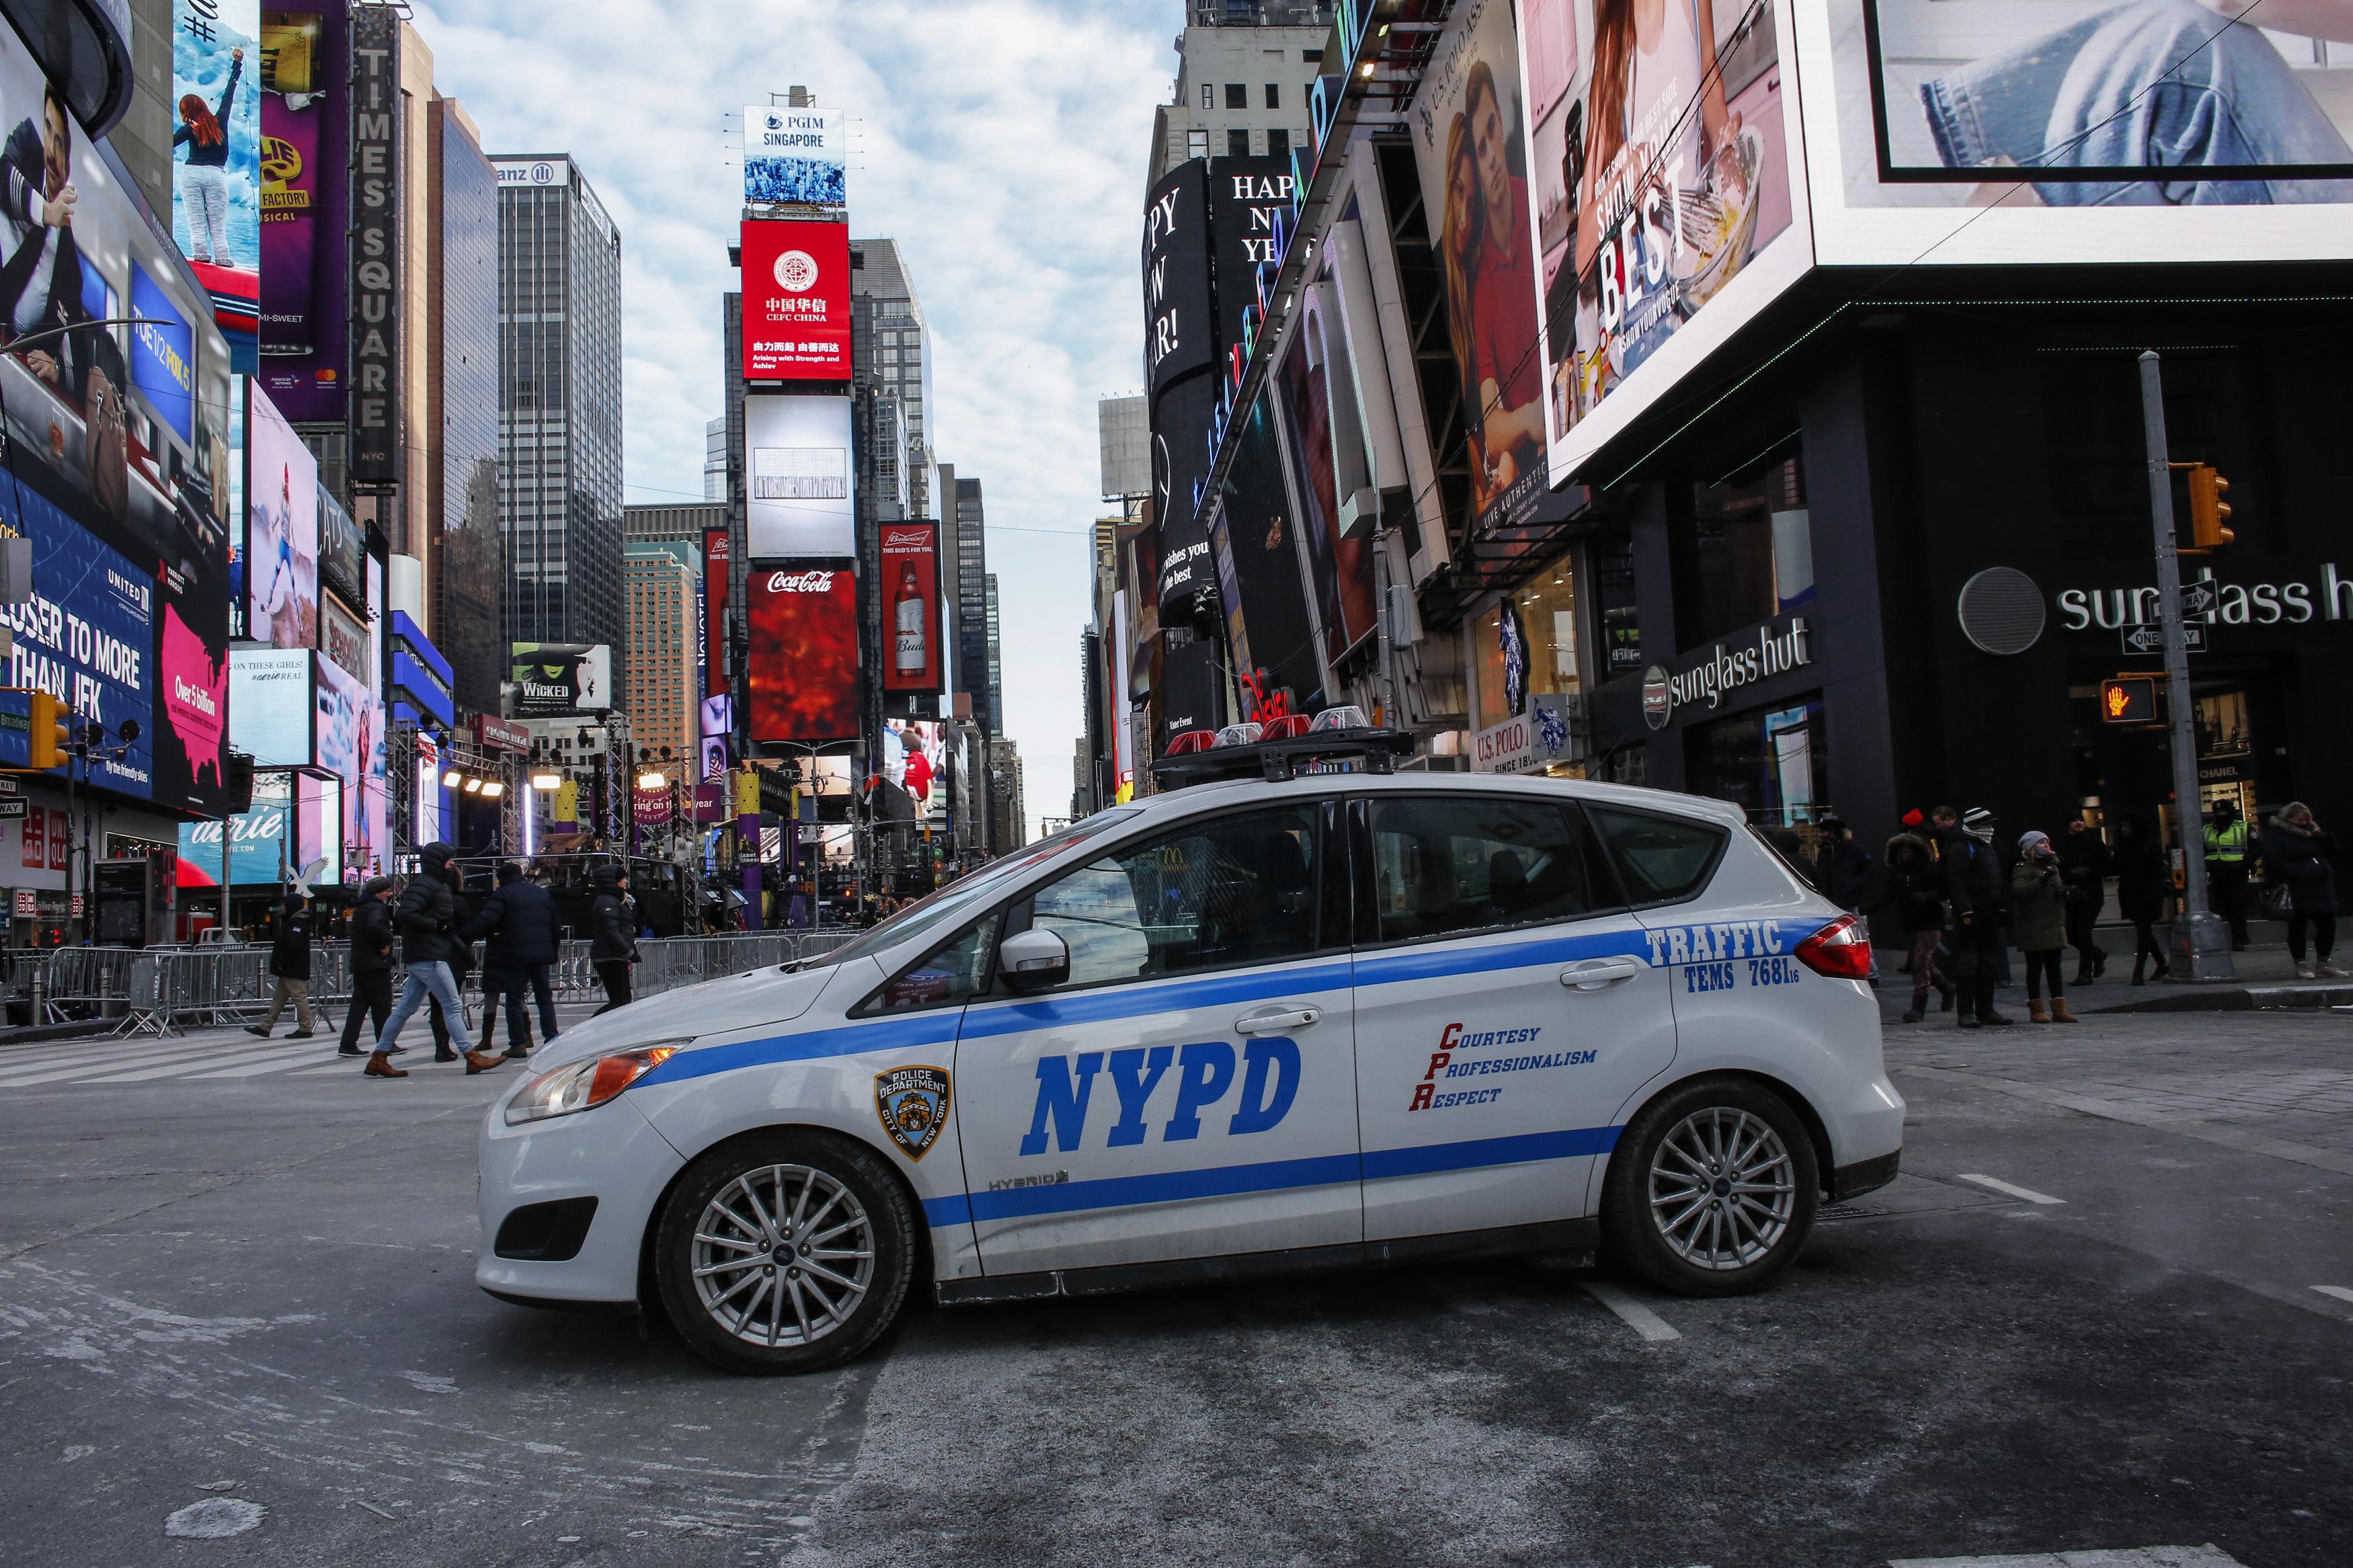 A New York Police Department (NYPD) car is parked in Times Square prior to New Year's Eve celebrations on December 31, 2017 in New York City. 